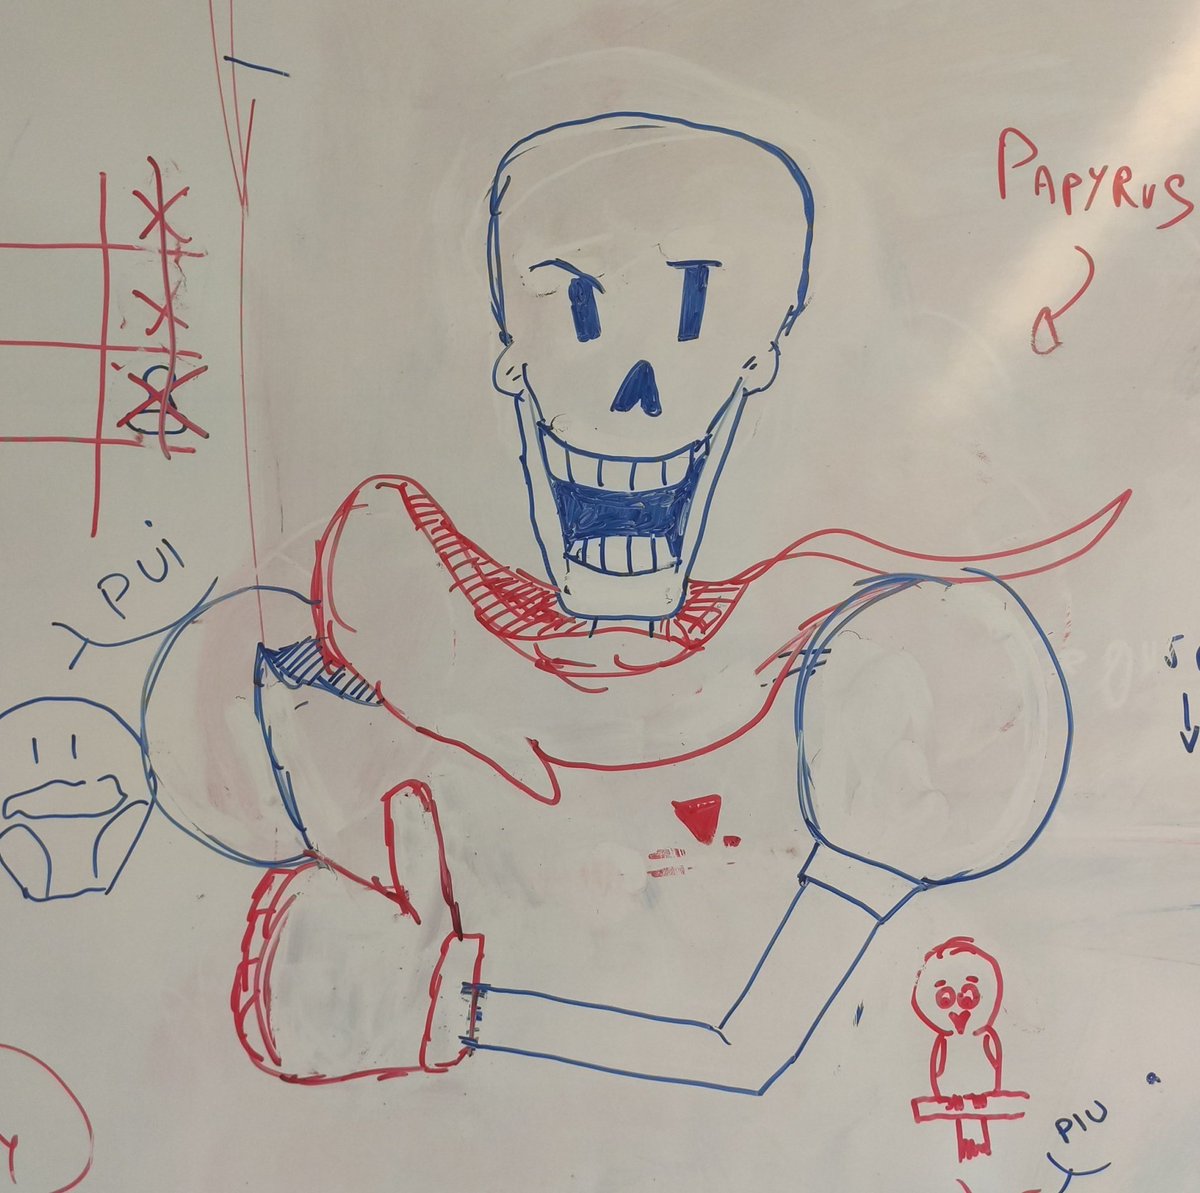 Papyrus in the workplace 👍
#undertale